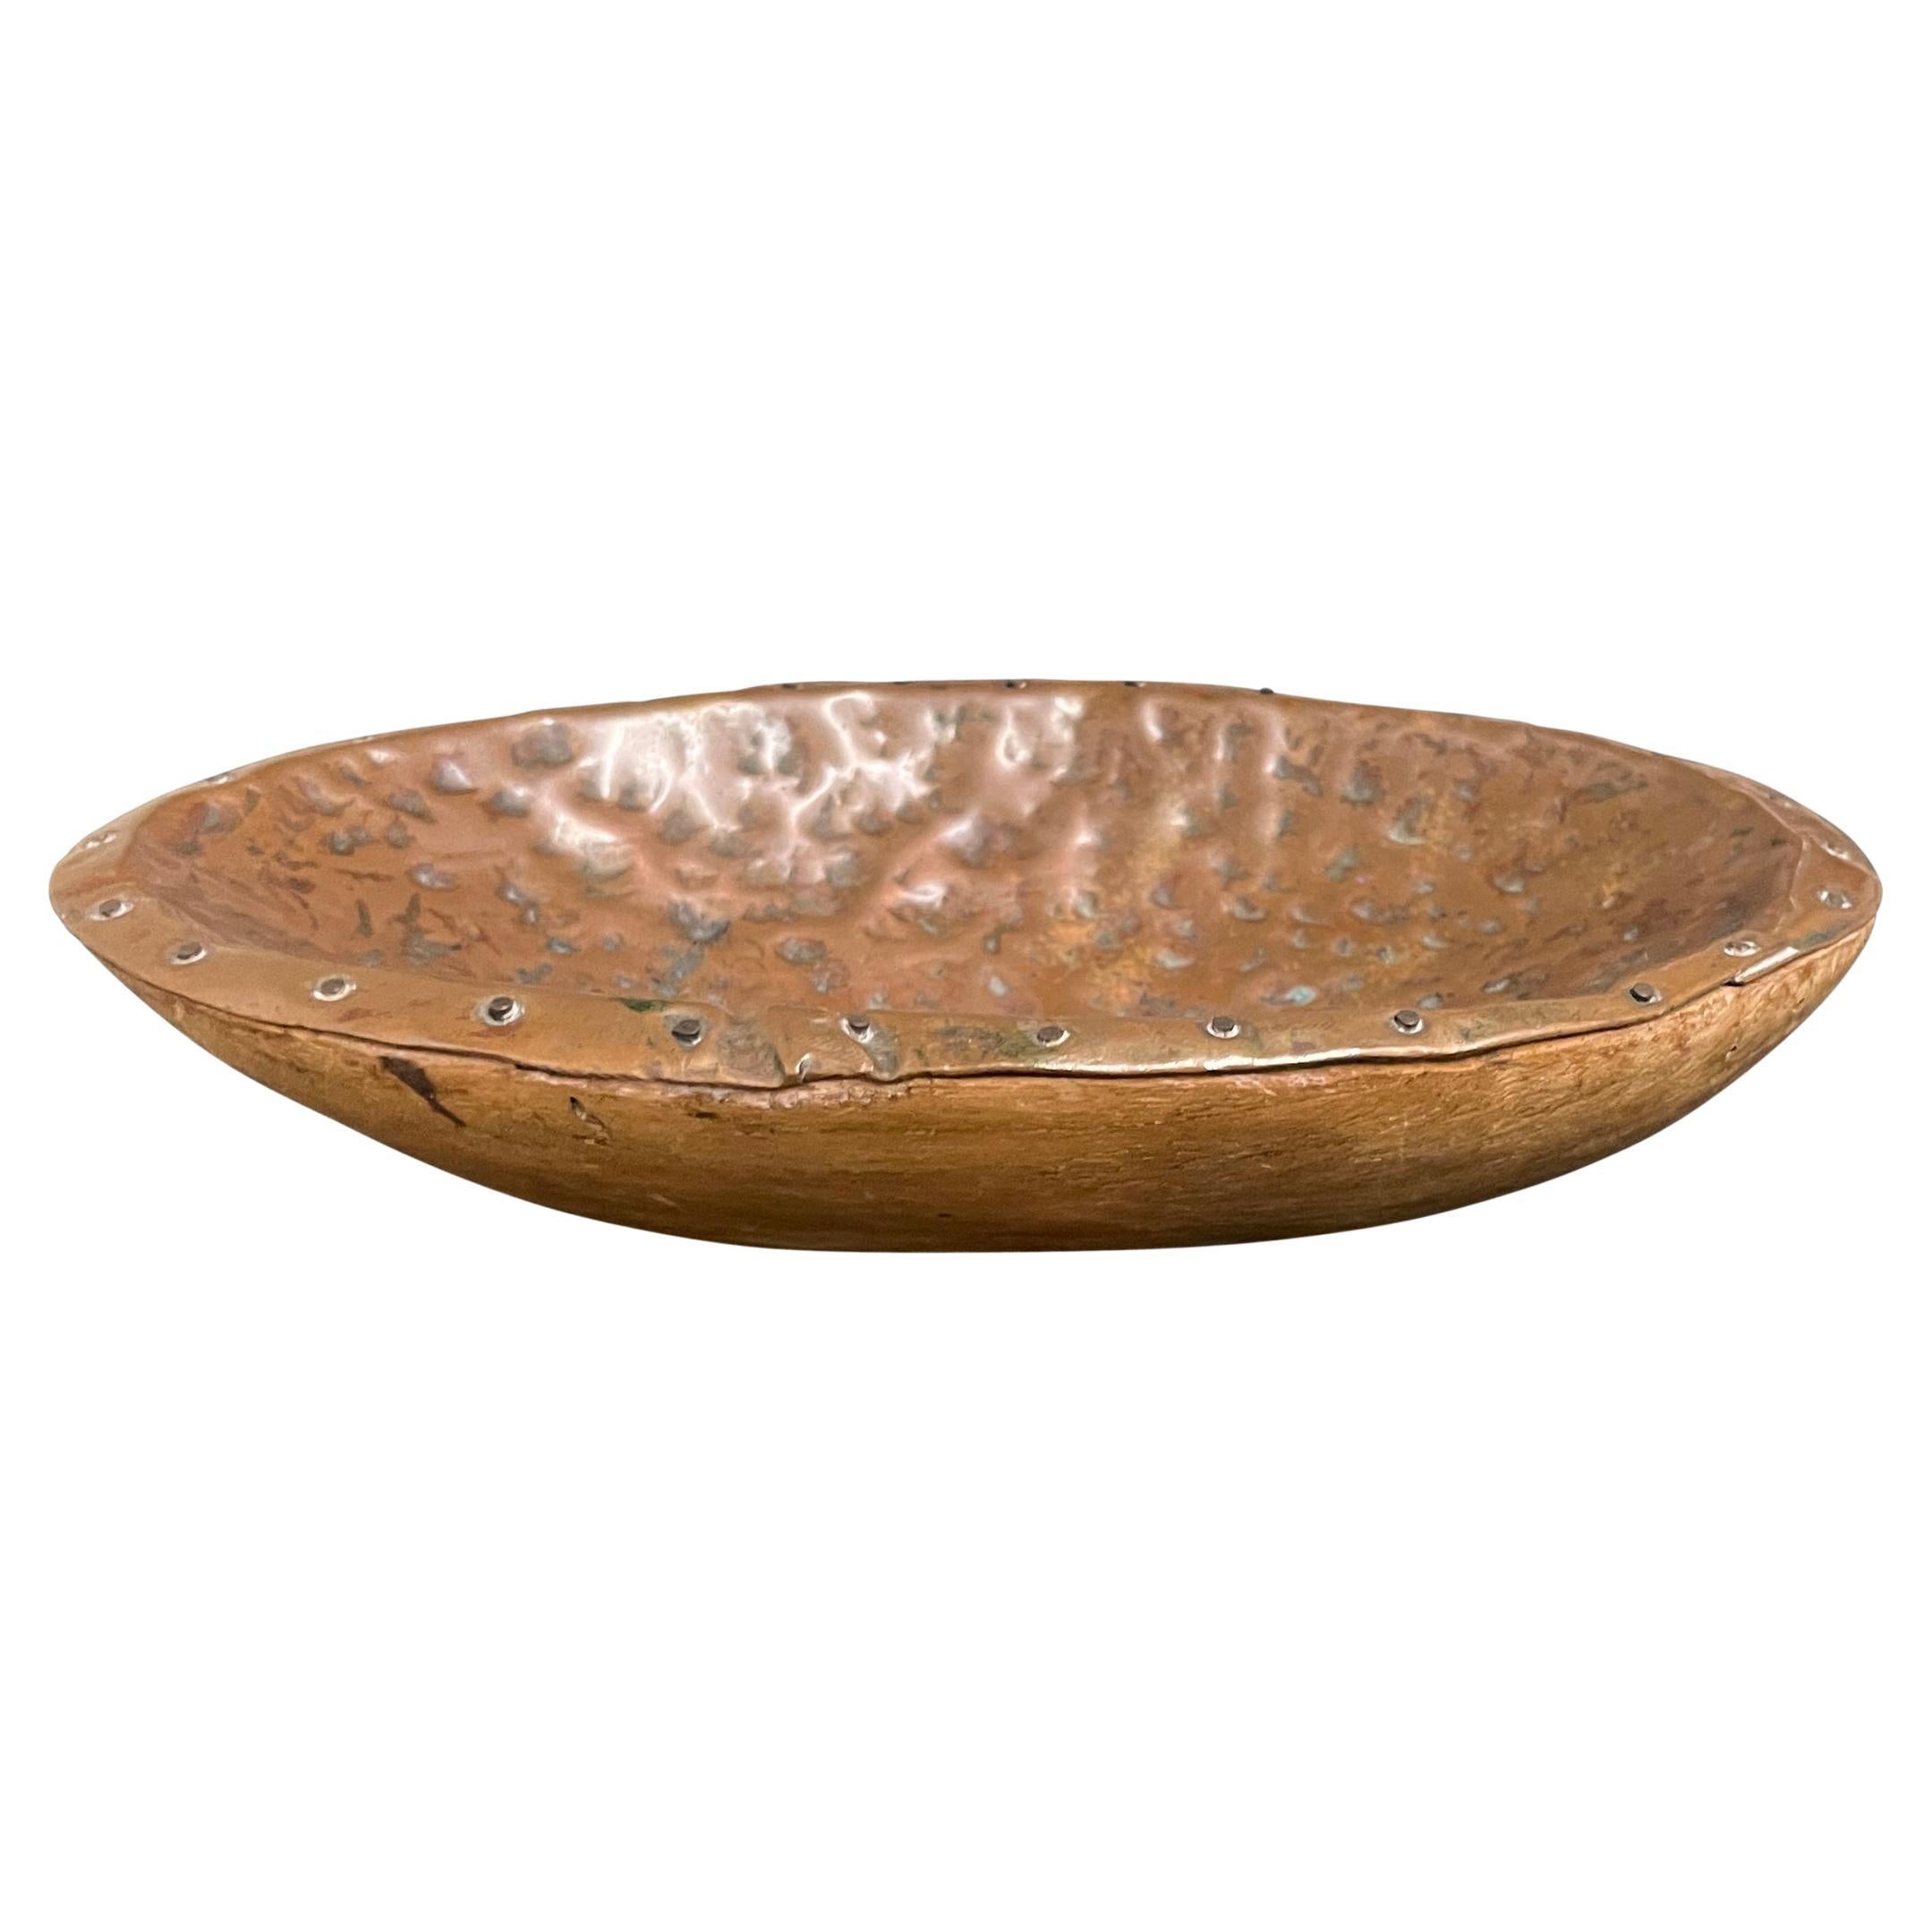 20th Century American Hammered Copper Bowl